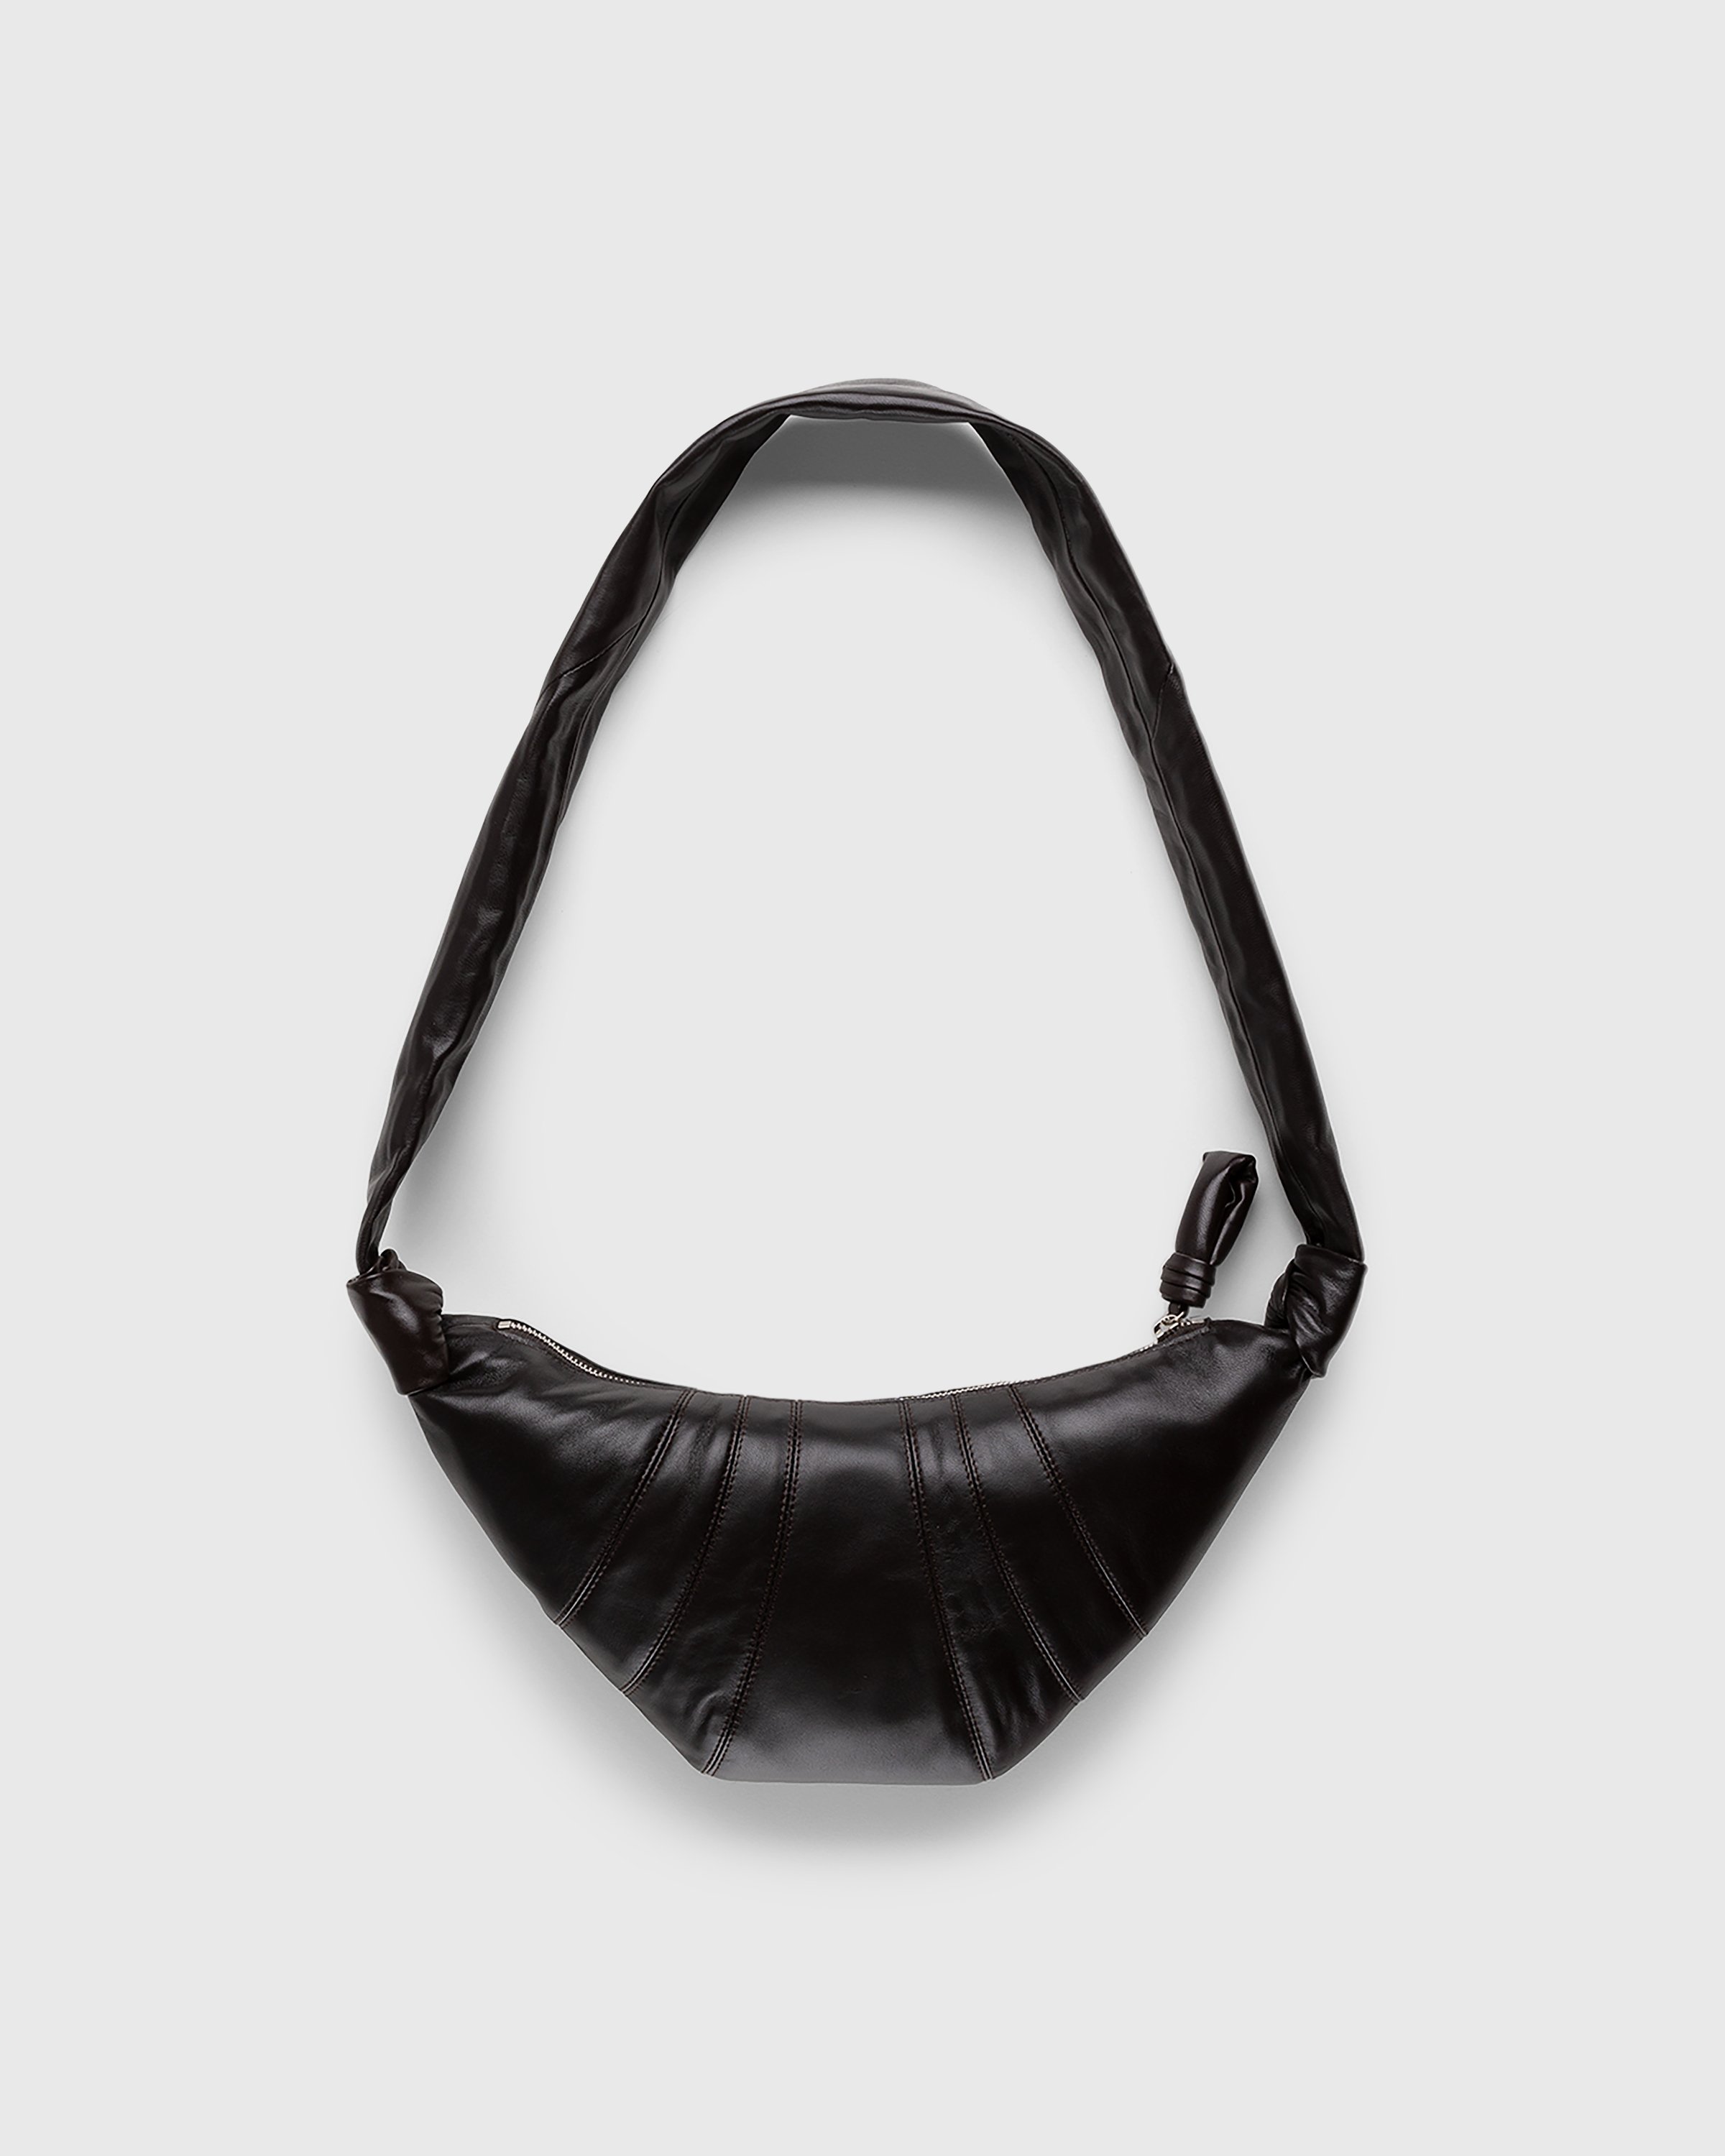 Lemaire x Highsnobiety - Not In Paris 4 Small Croissant Bag Dark Chocolate - Accessories - Black - Image 2